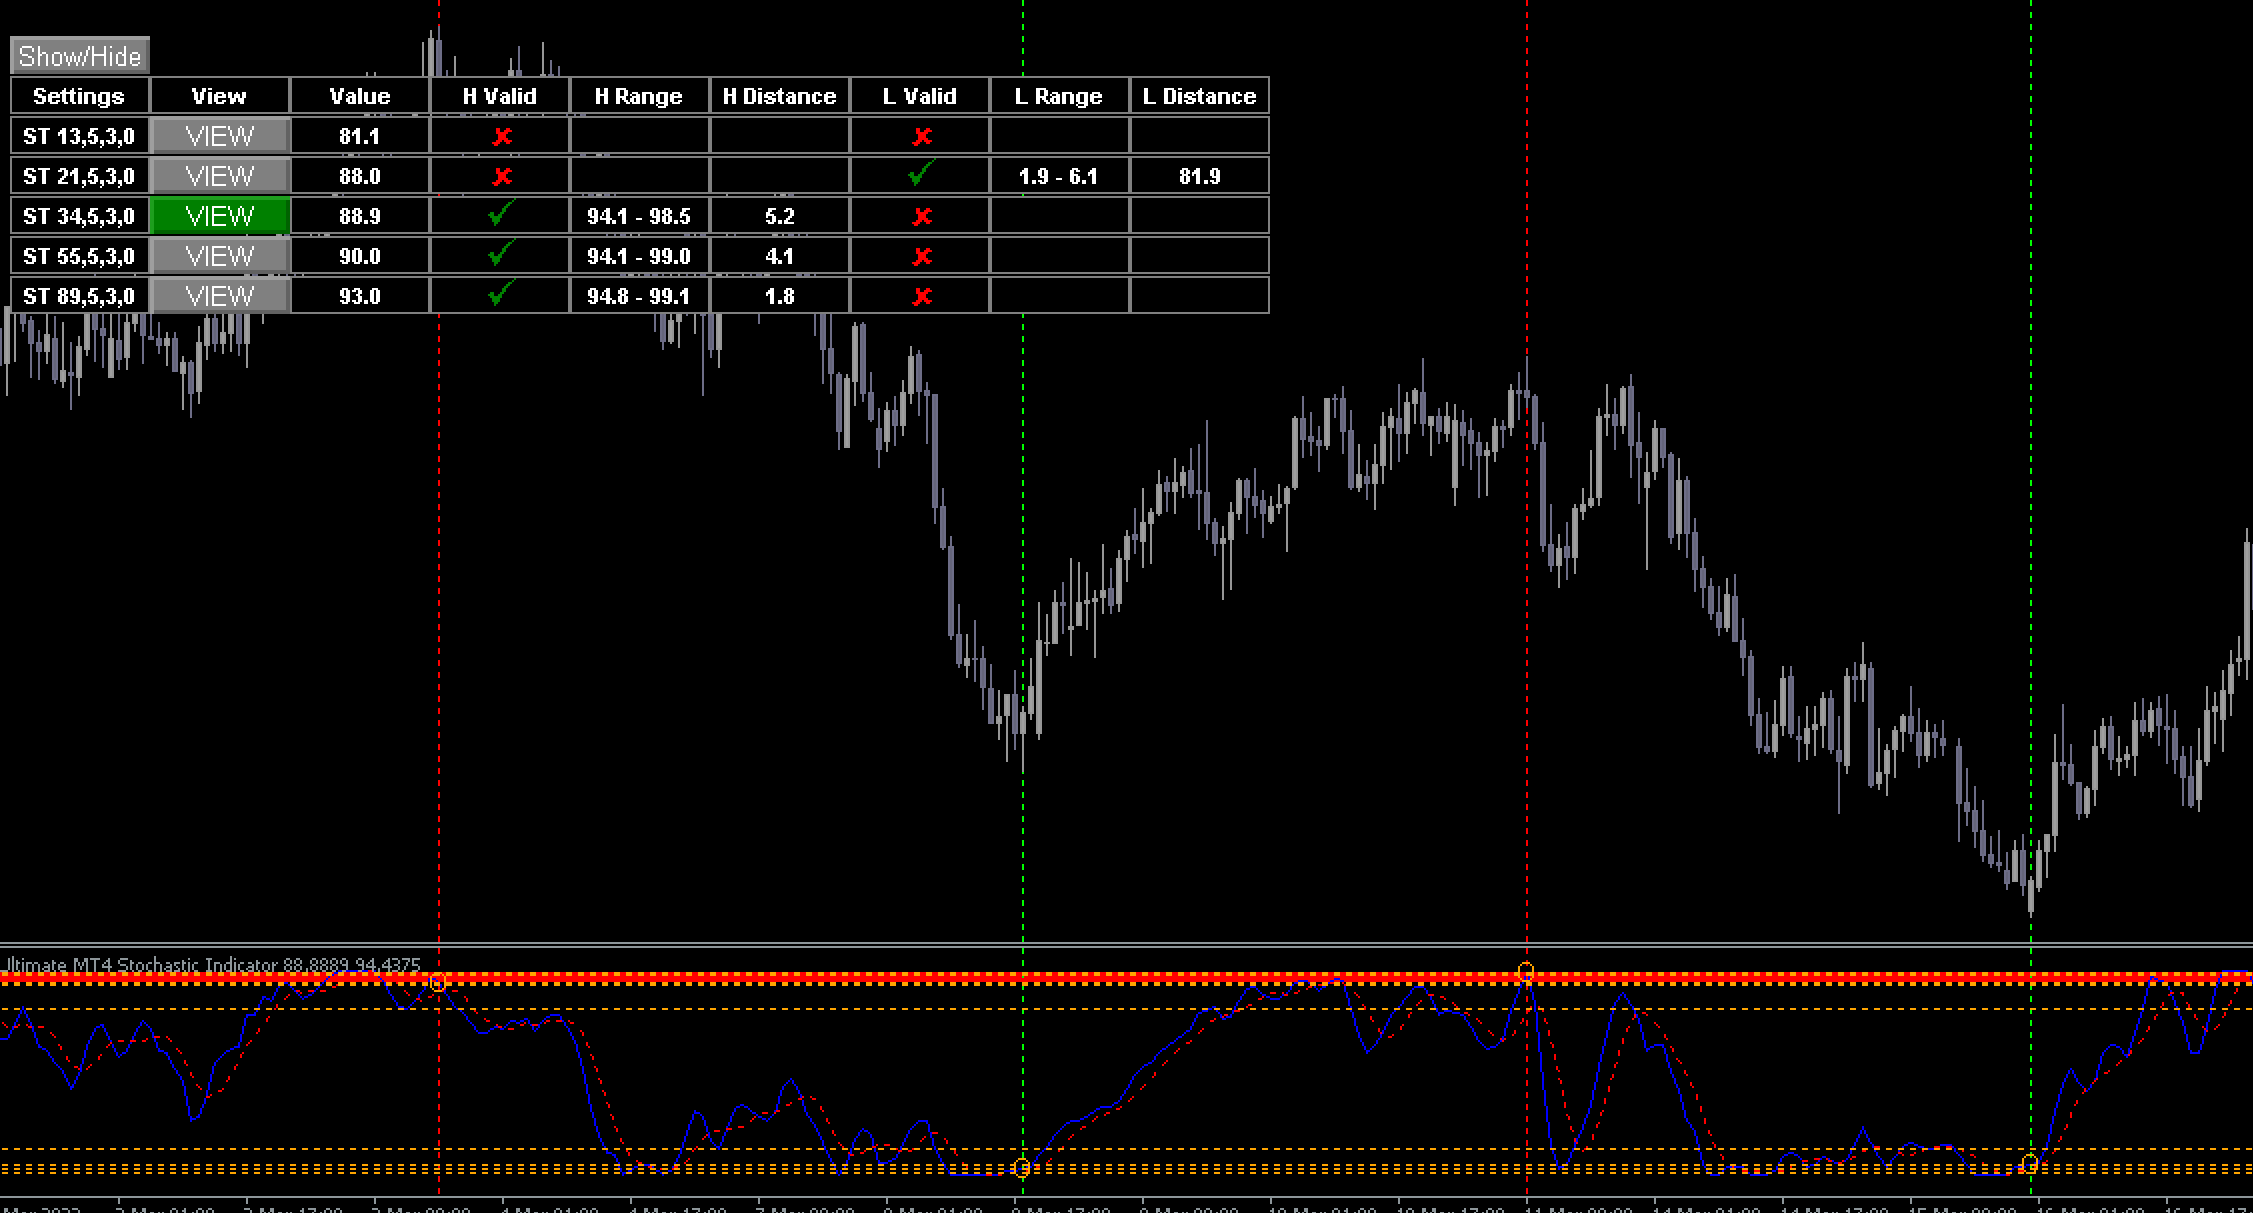 MT4 Stochastic Indicator FREE Download